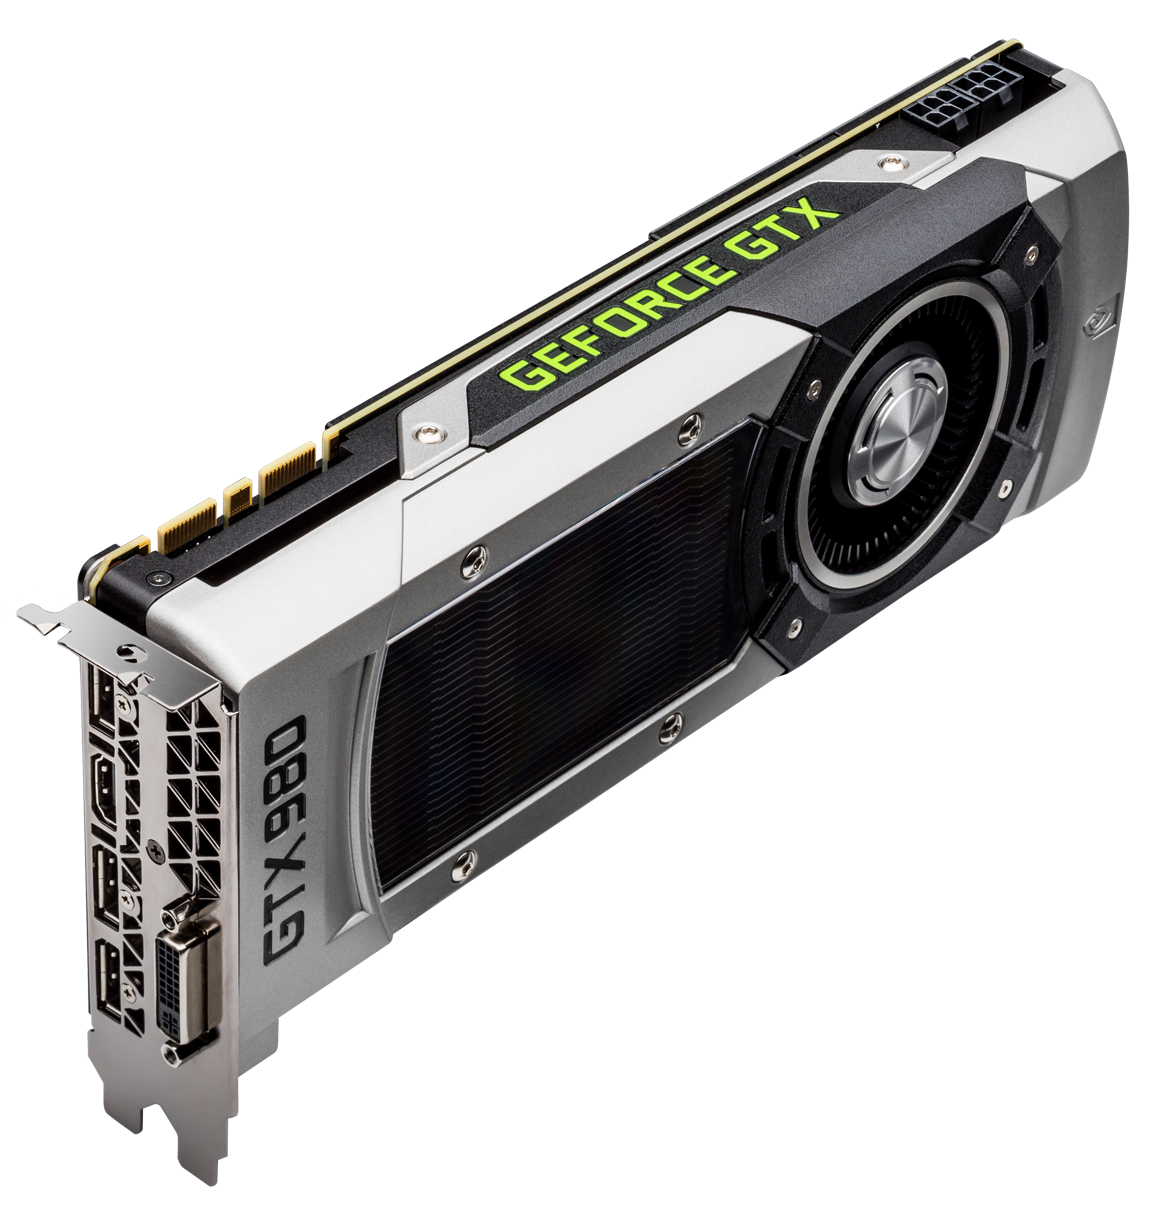 Nvidia Unveils Its All New Geforce Gtx 980 And Gtx 970 Graphics Processors Pcworld